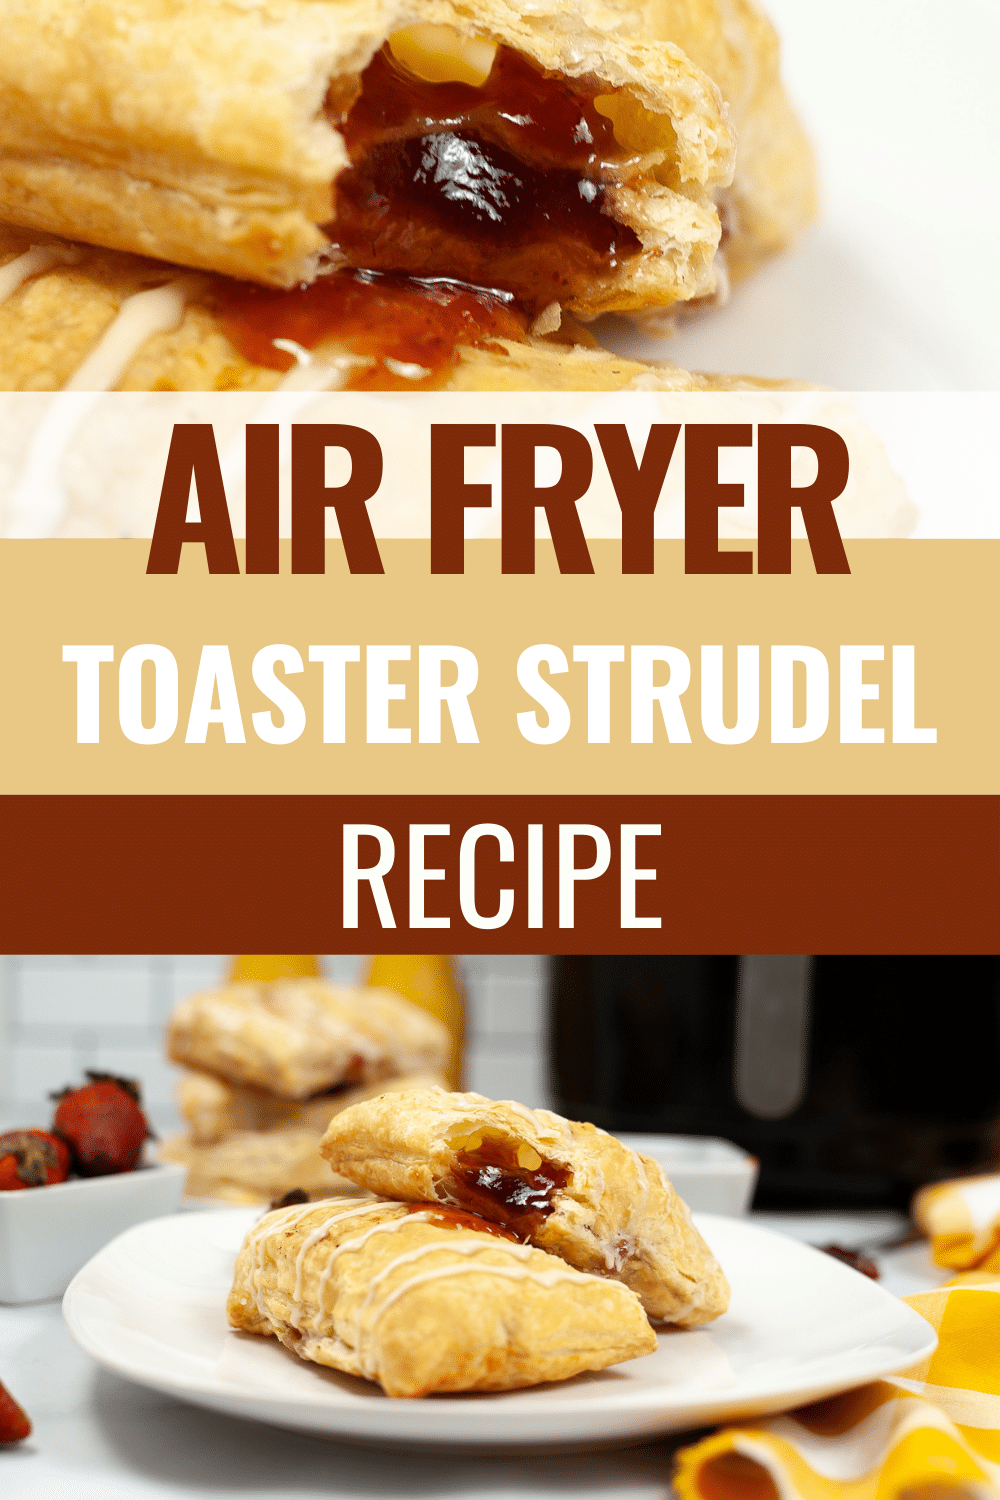 At the bottom half of the image are two pieces of Air Fryer Toaster Strudel on a white serving plate with one of them slightly open to show the strawberry filling and on the upper half is a text saying "Air Fryer Toaster Strudel Recipe"